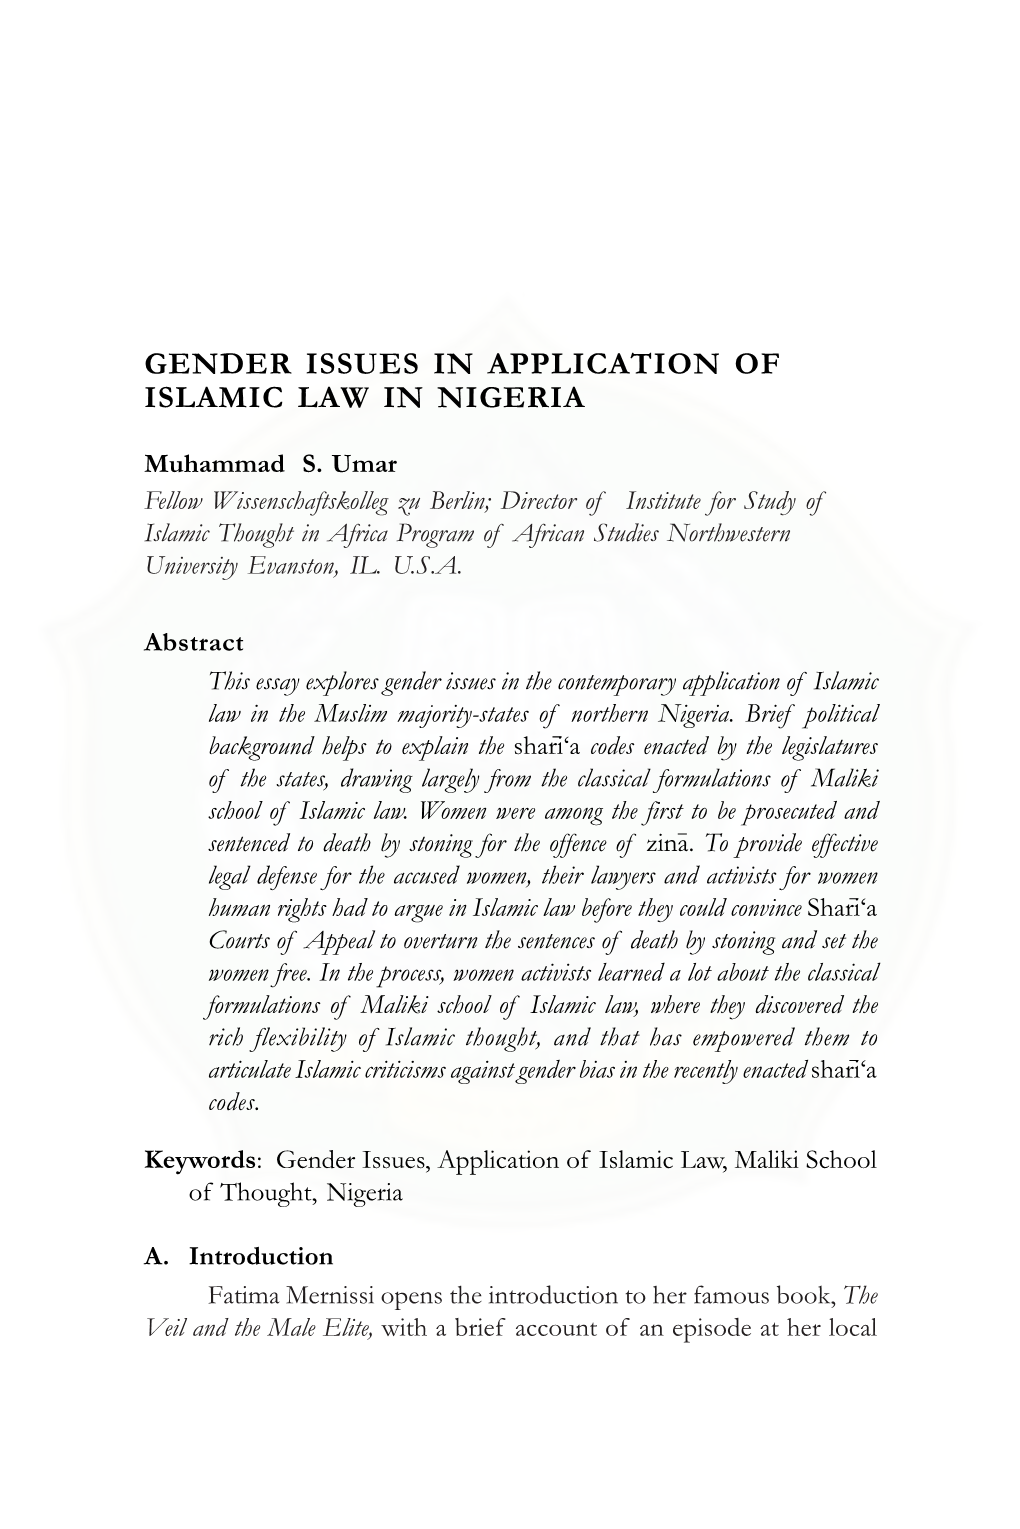 Gender Issues in Application of Islamic Law in Nigeria